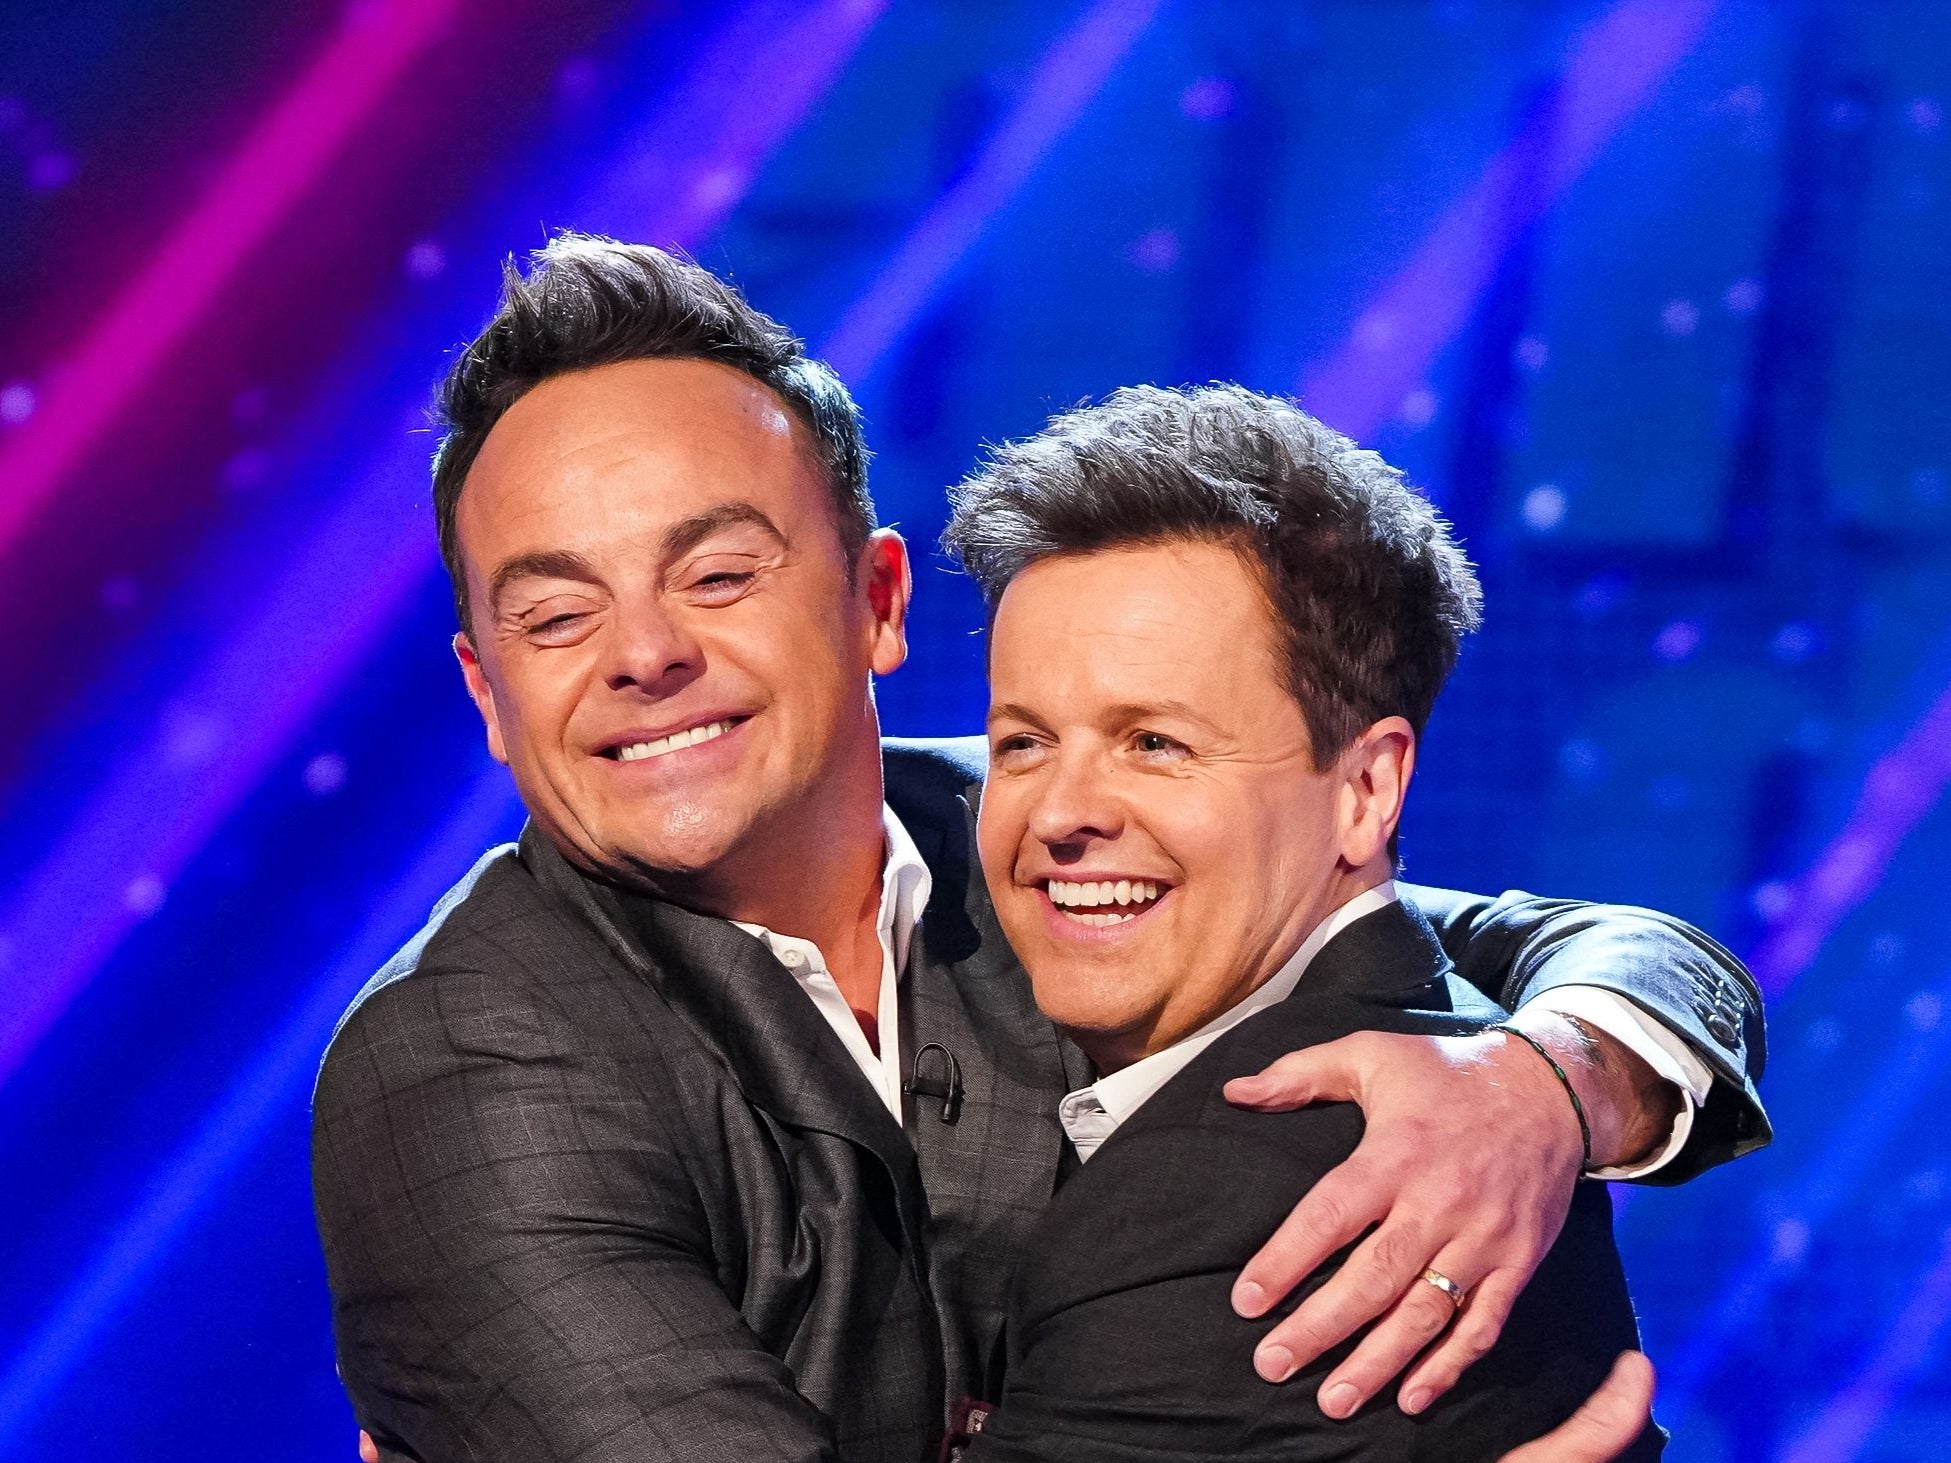 Ant and Dec on ITV series ‘Saturday Night Takeaway'